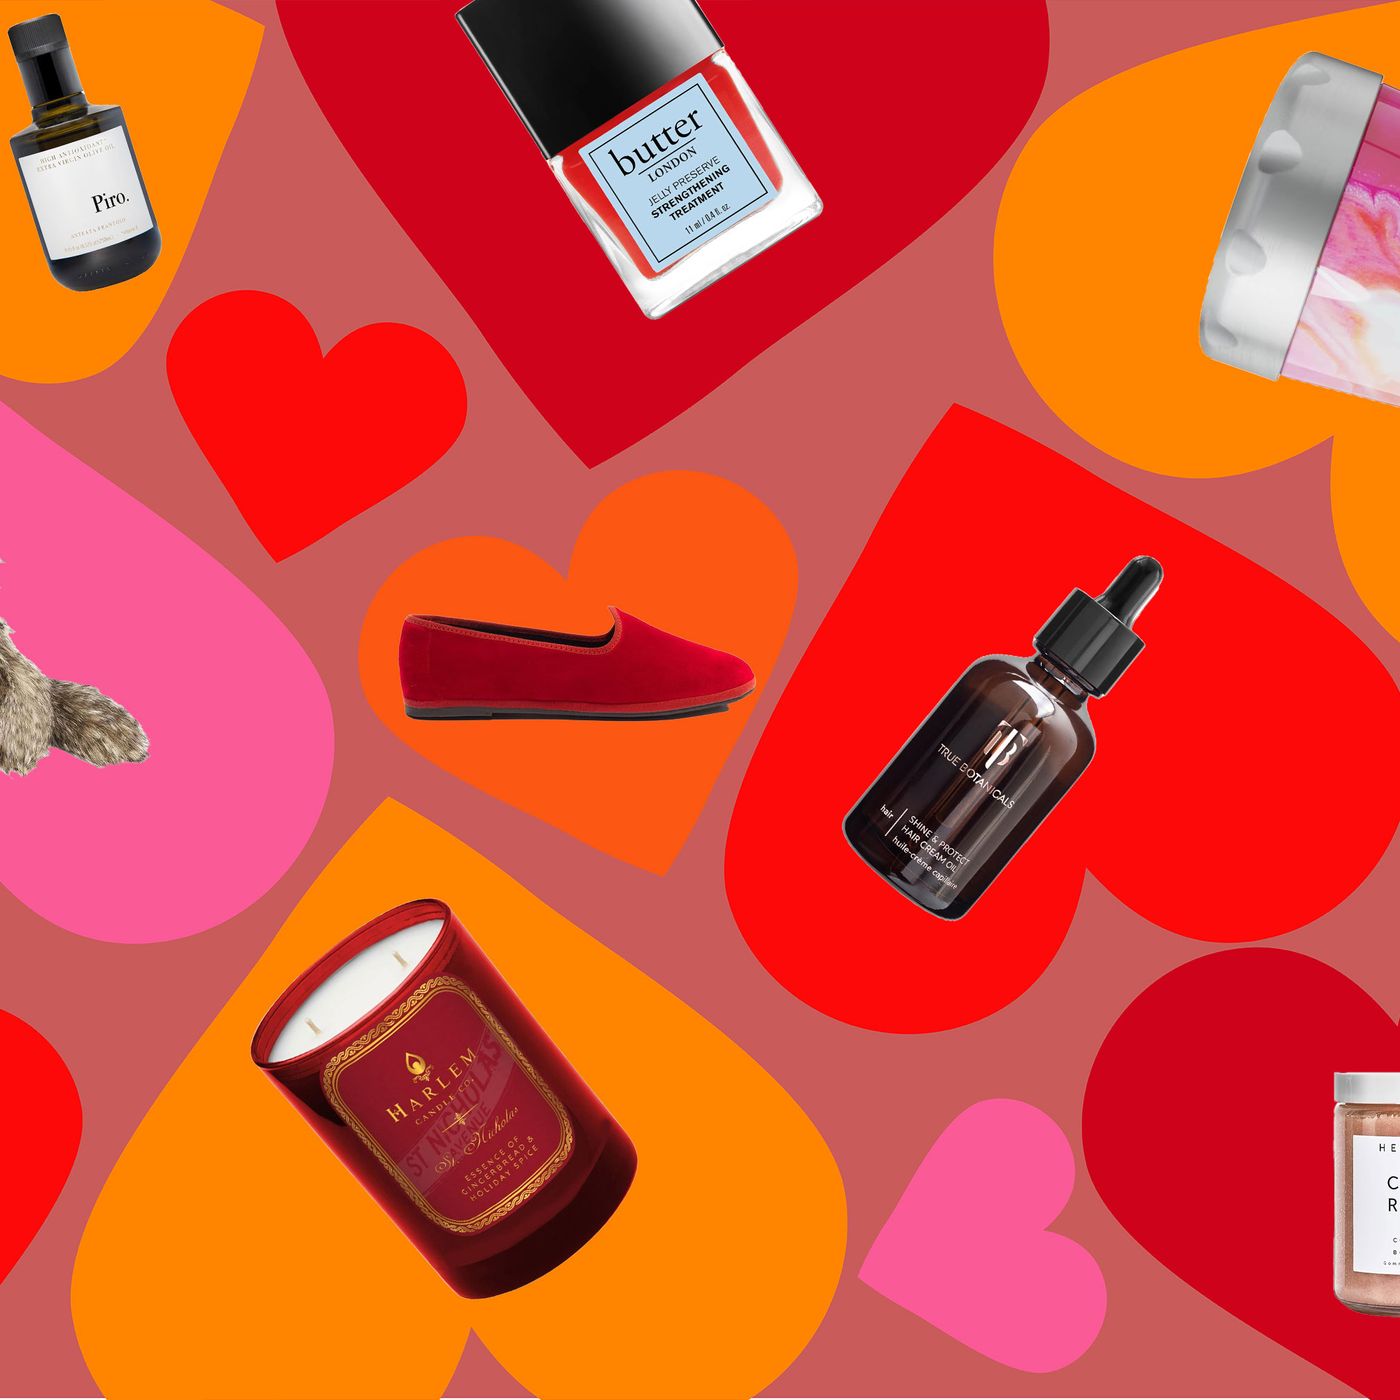 Choosing Perfect Valentine's Day Gifts: Lingerie Gifting Ideas